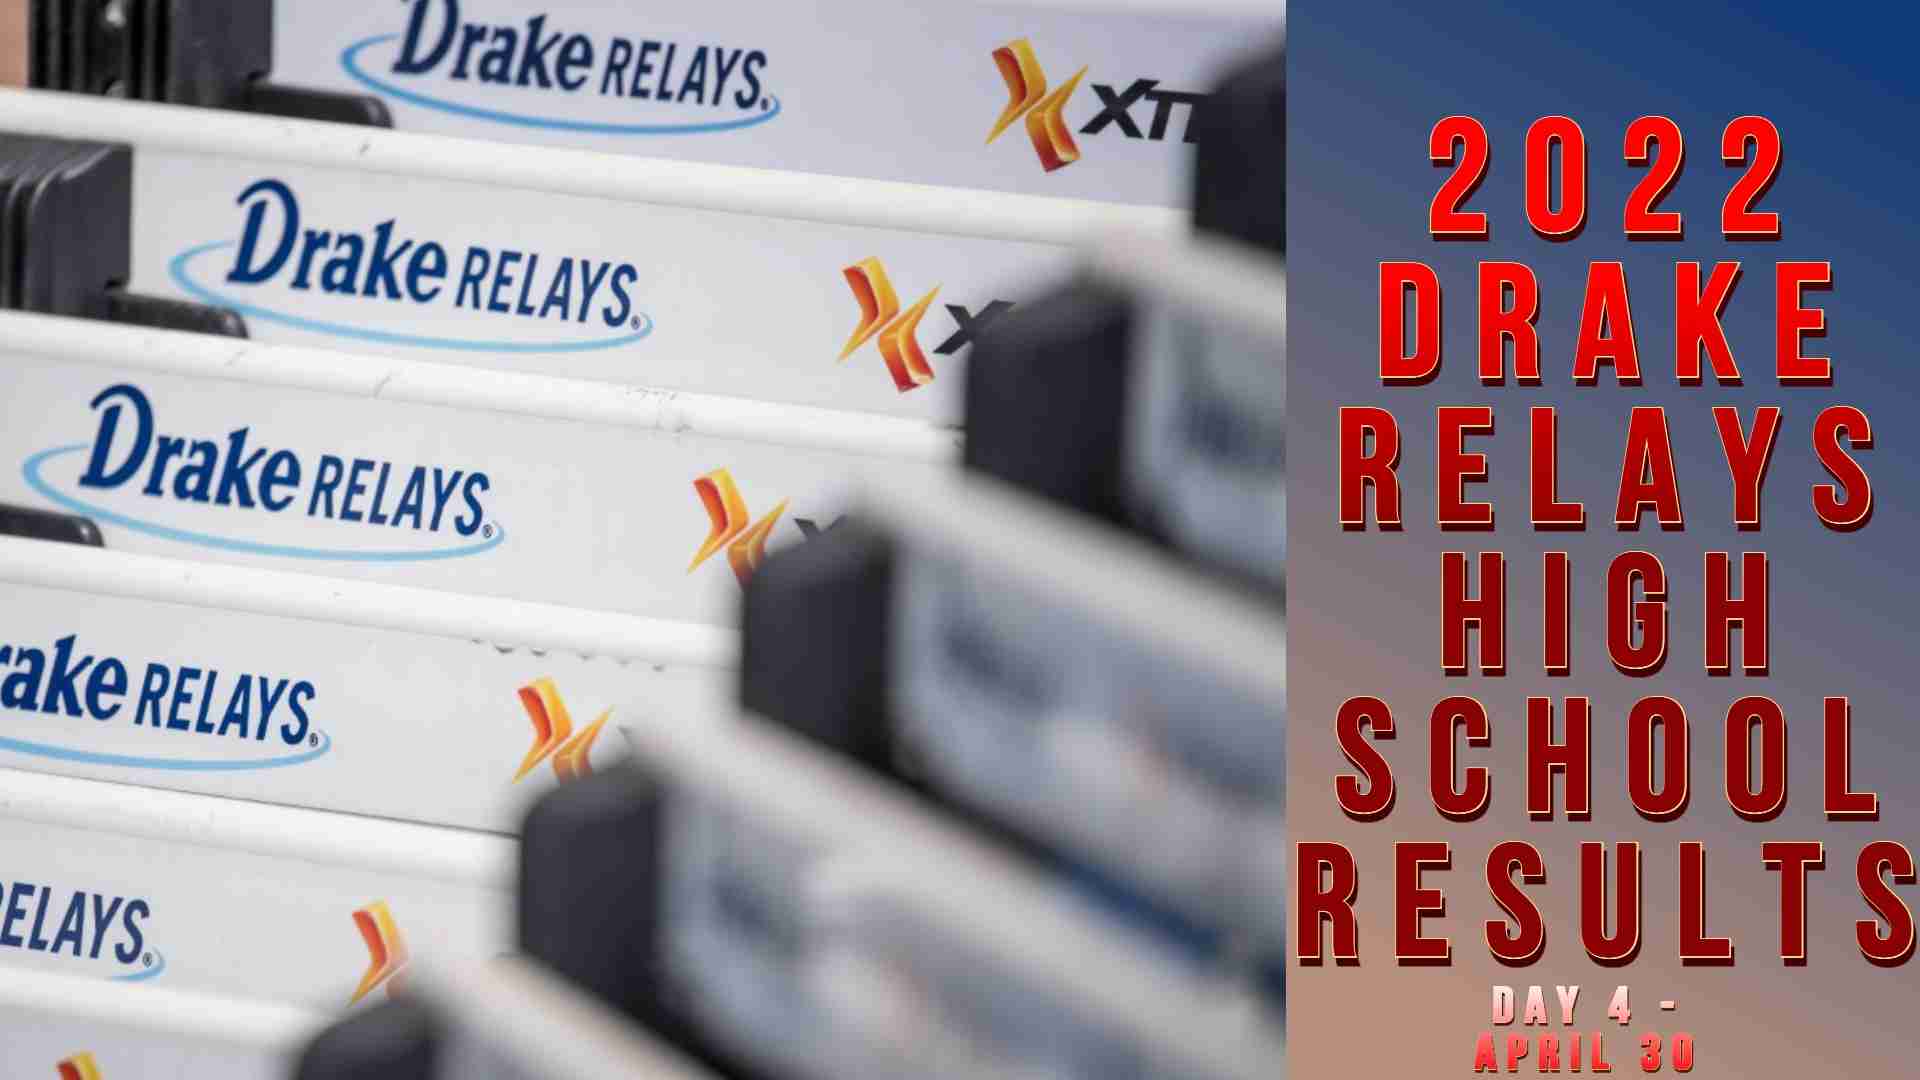 Day 4 2022 Drake Relays high school results